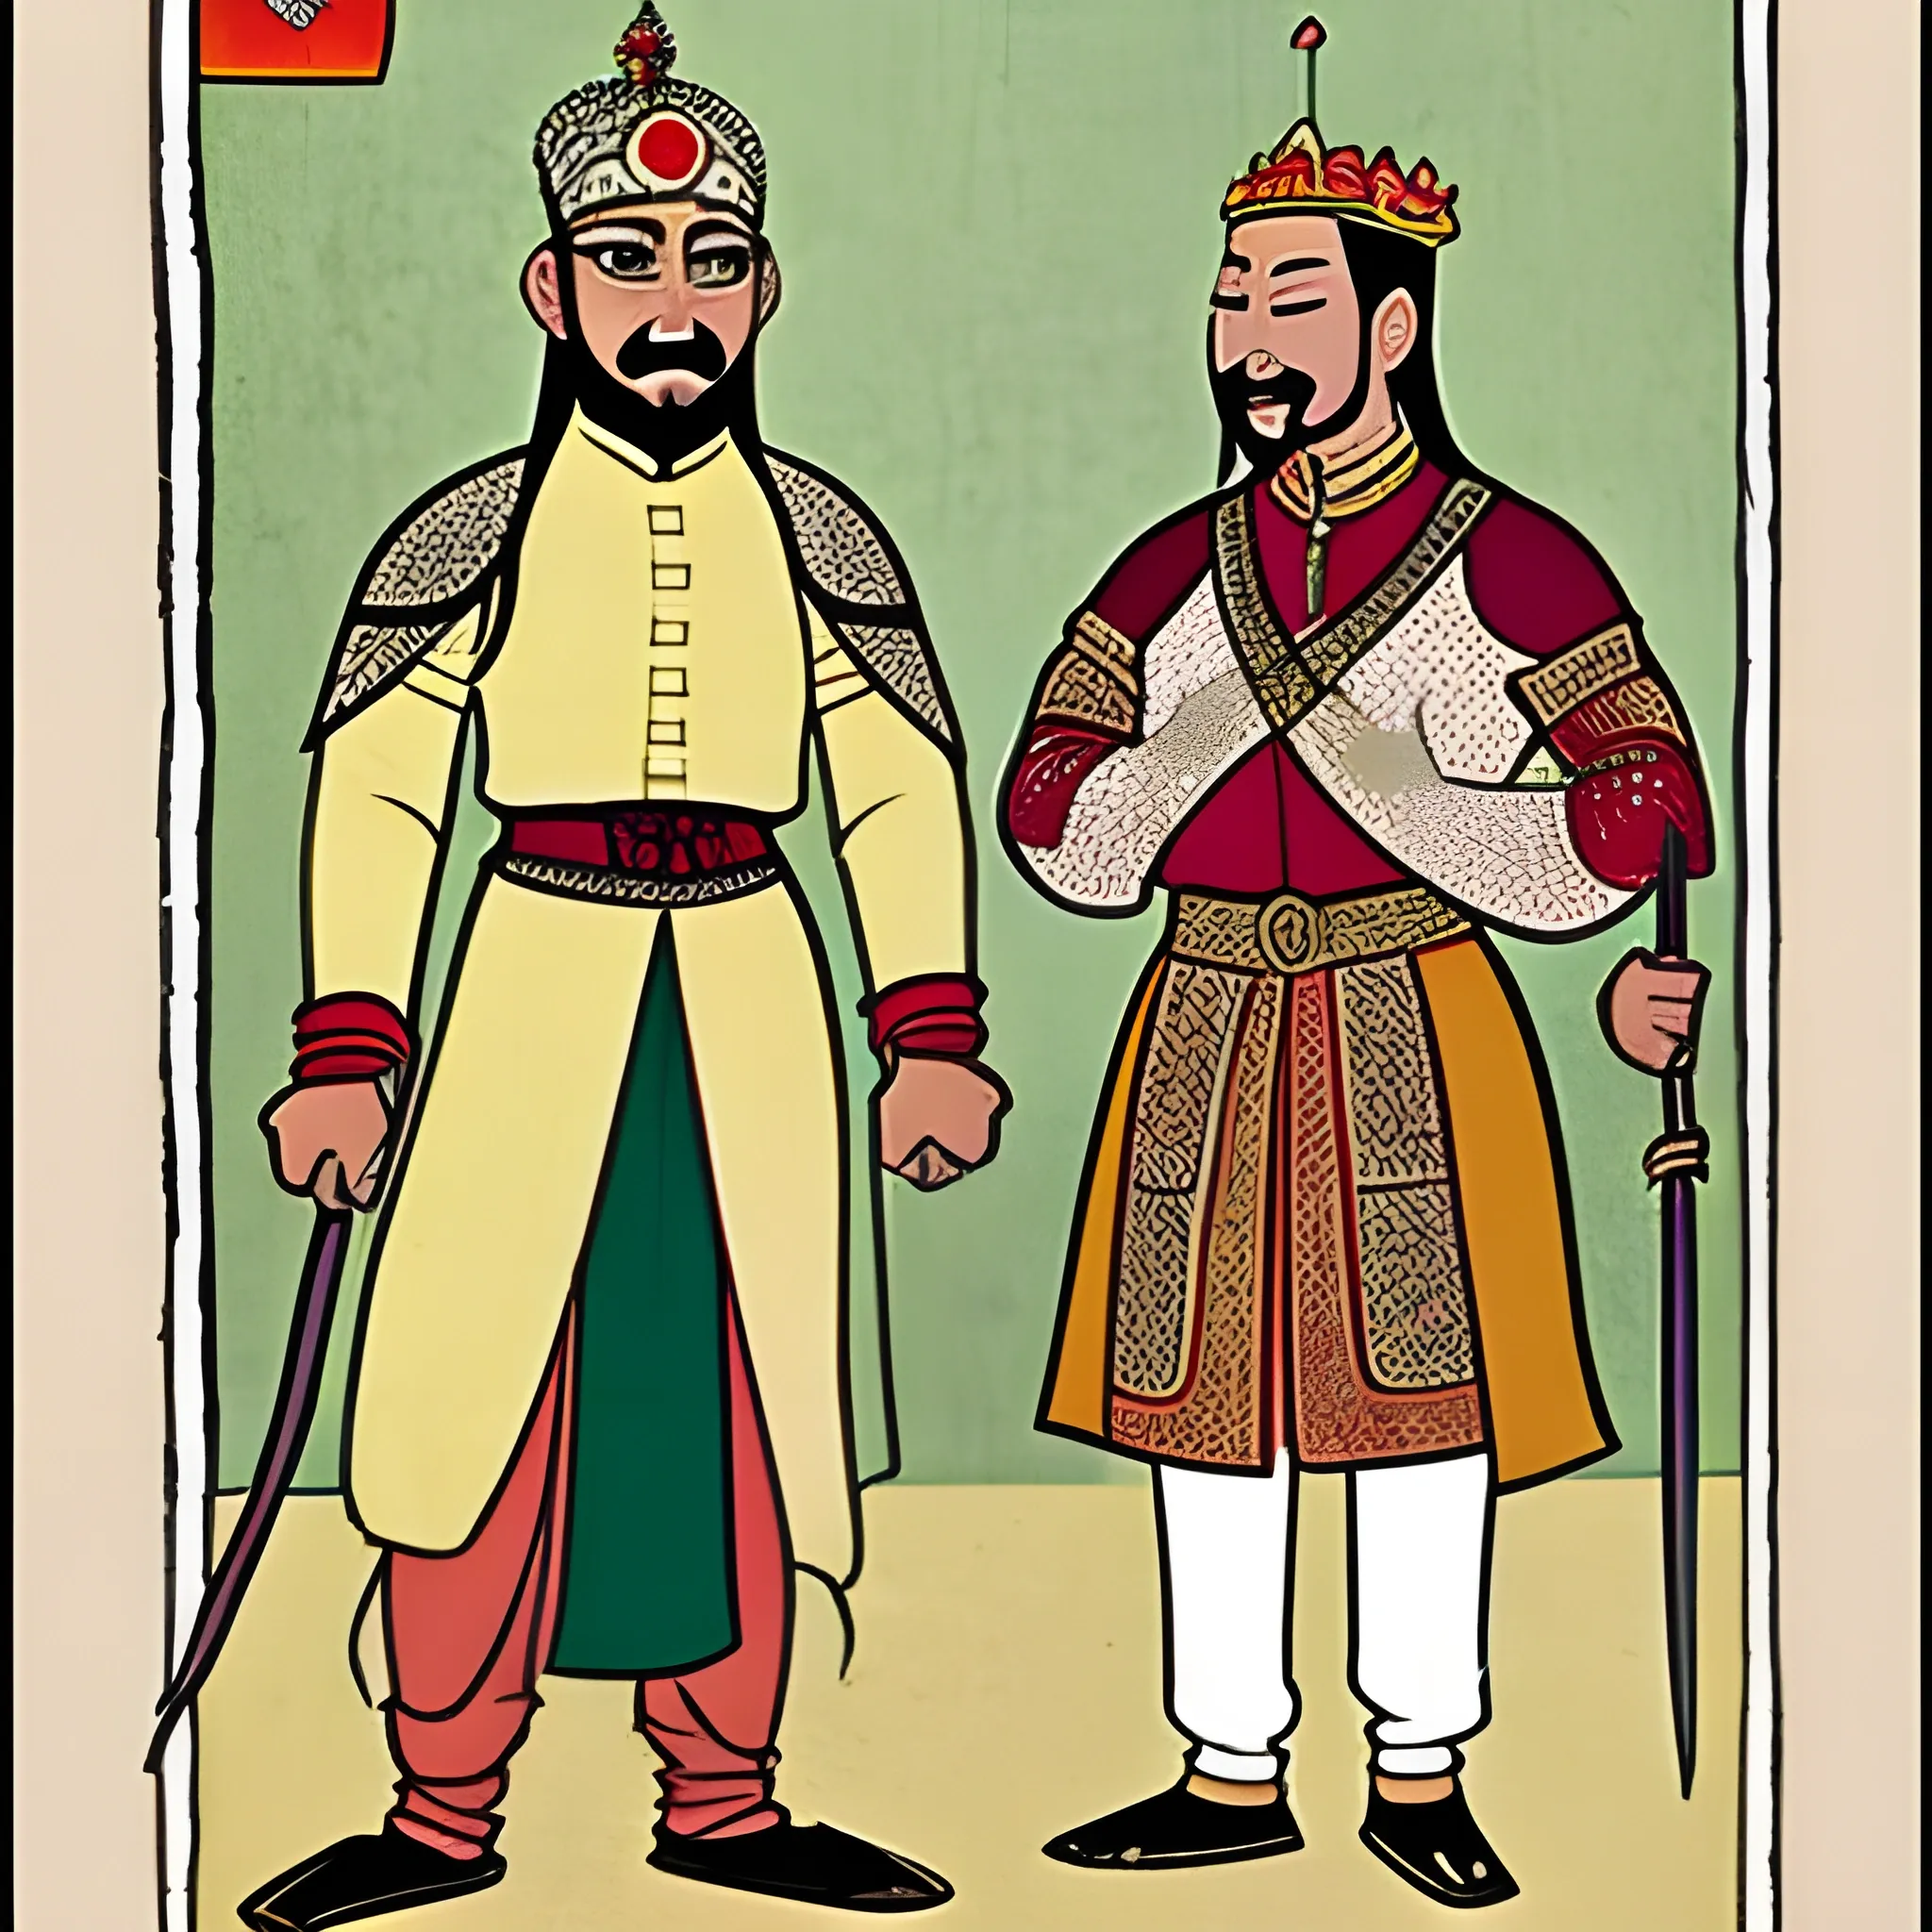 medieval Indian king and Chinese king happy after the war

, Cartoon